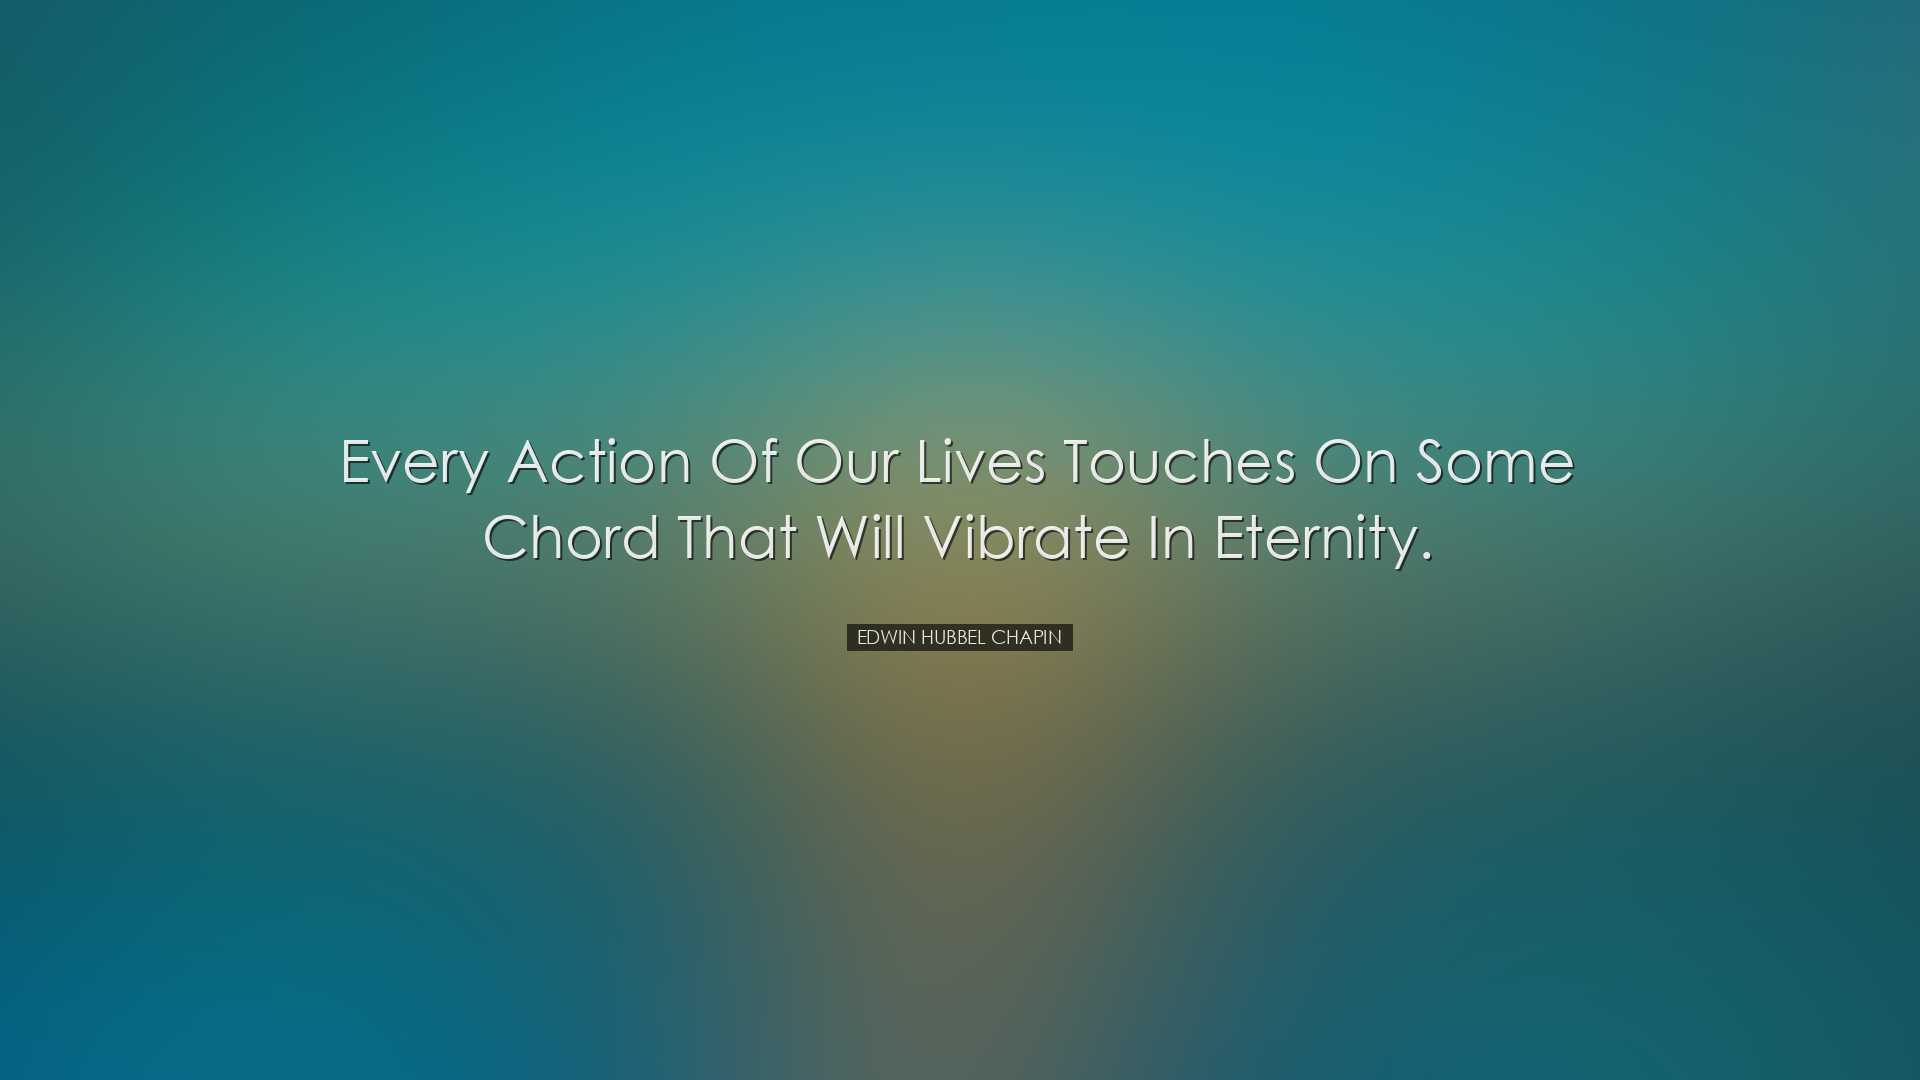 Every action of our lives touches on some chord that will vibrate